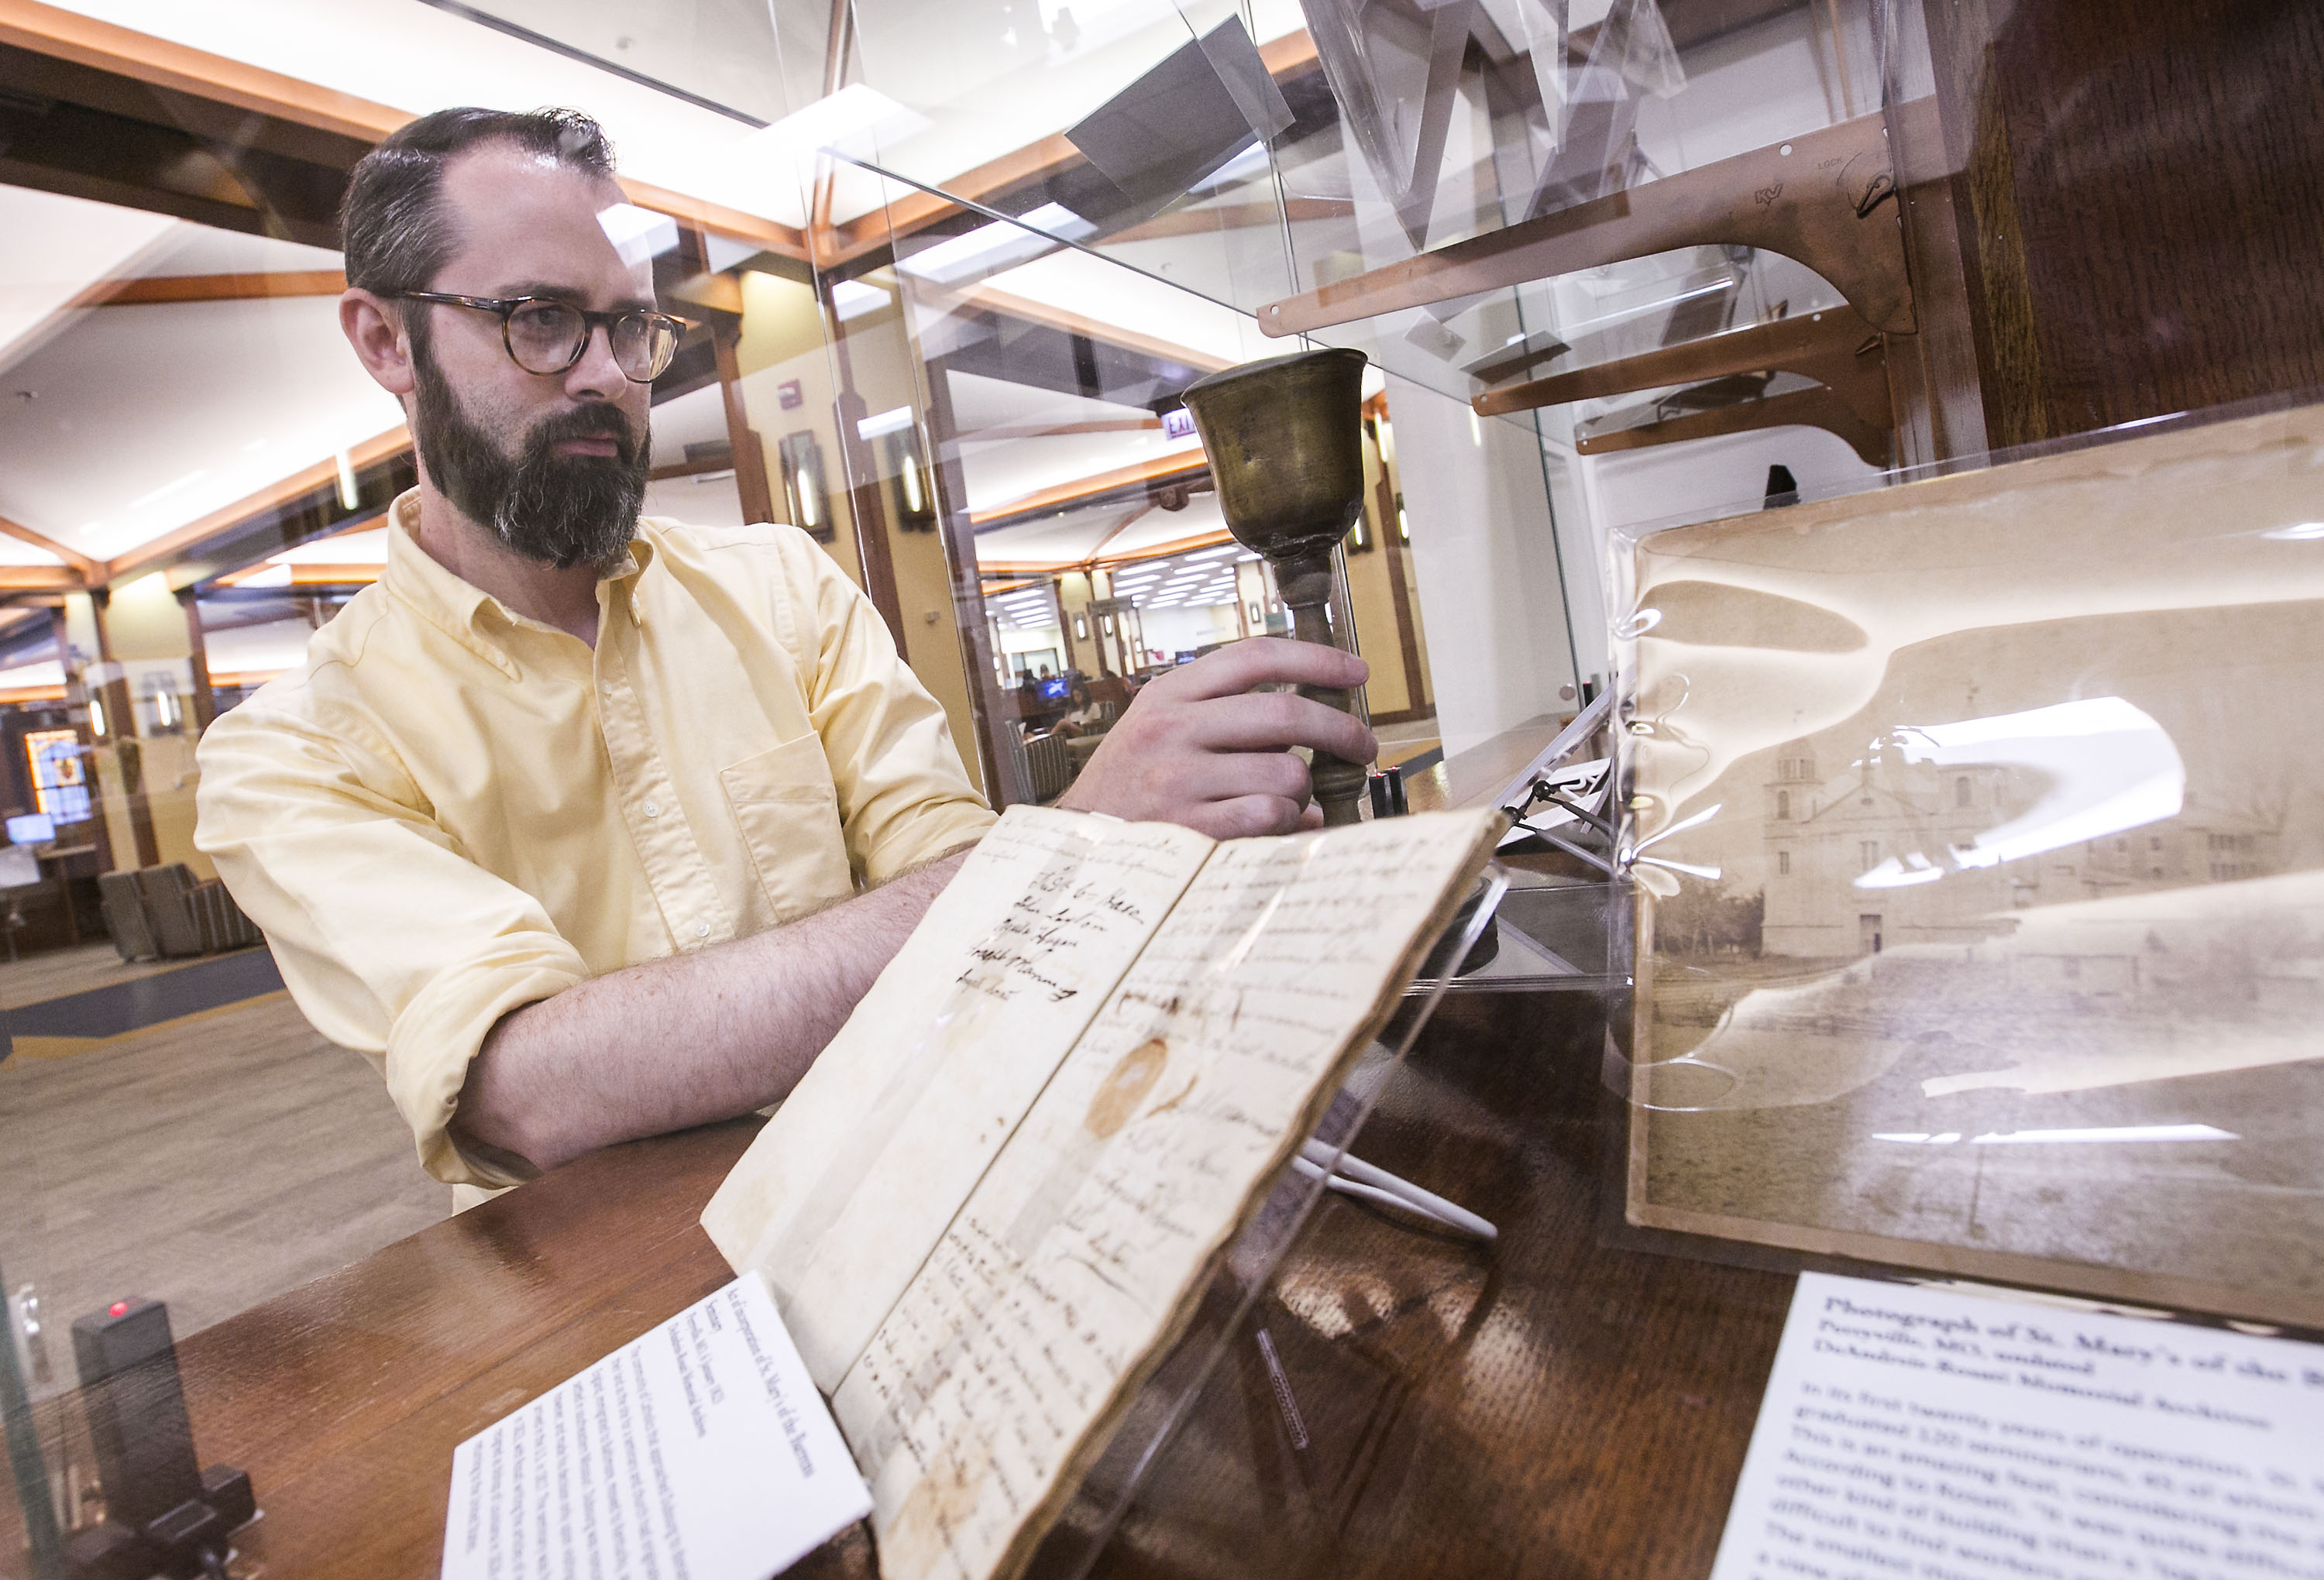 Andrew Rea, DePaul's Vincentian Librarian, places a small wooden chalice into a display case as he prepares for an exhibit of Vincentian artifacts at the John T. Richardson Library. (DePaul University/Jamie Moncrief)